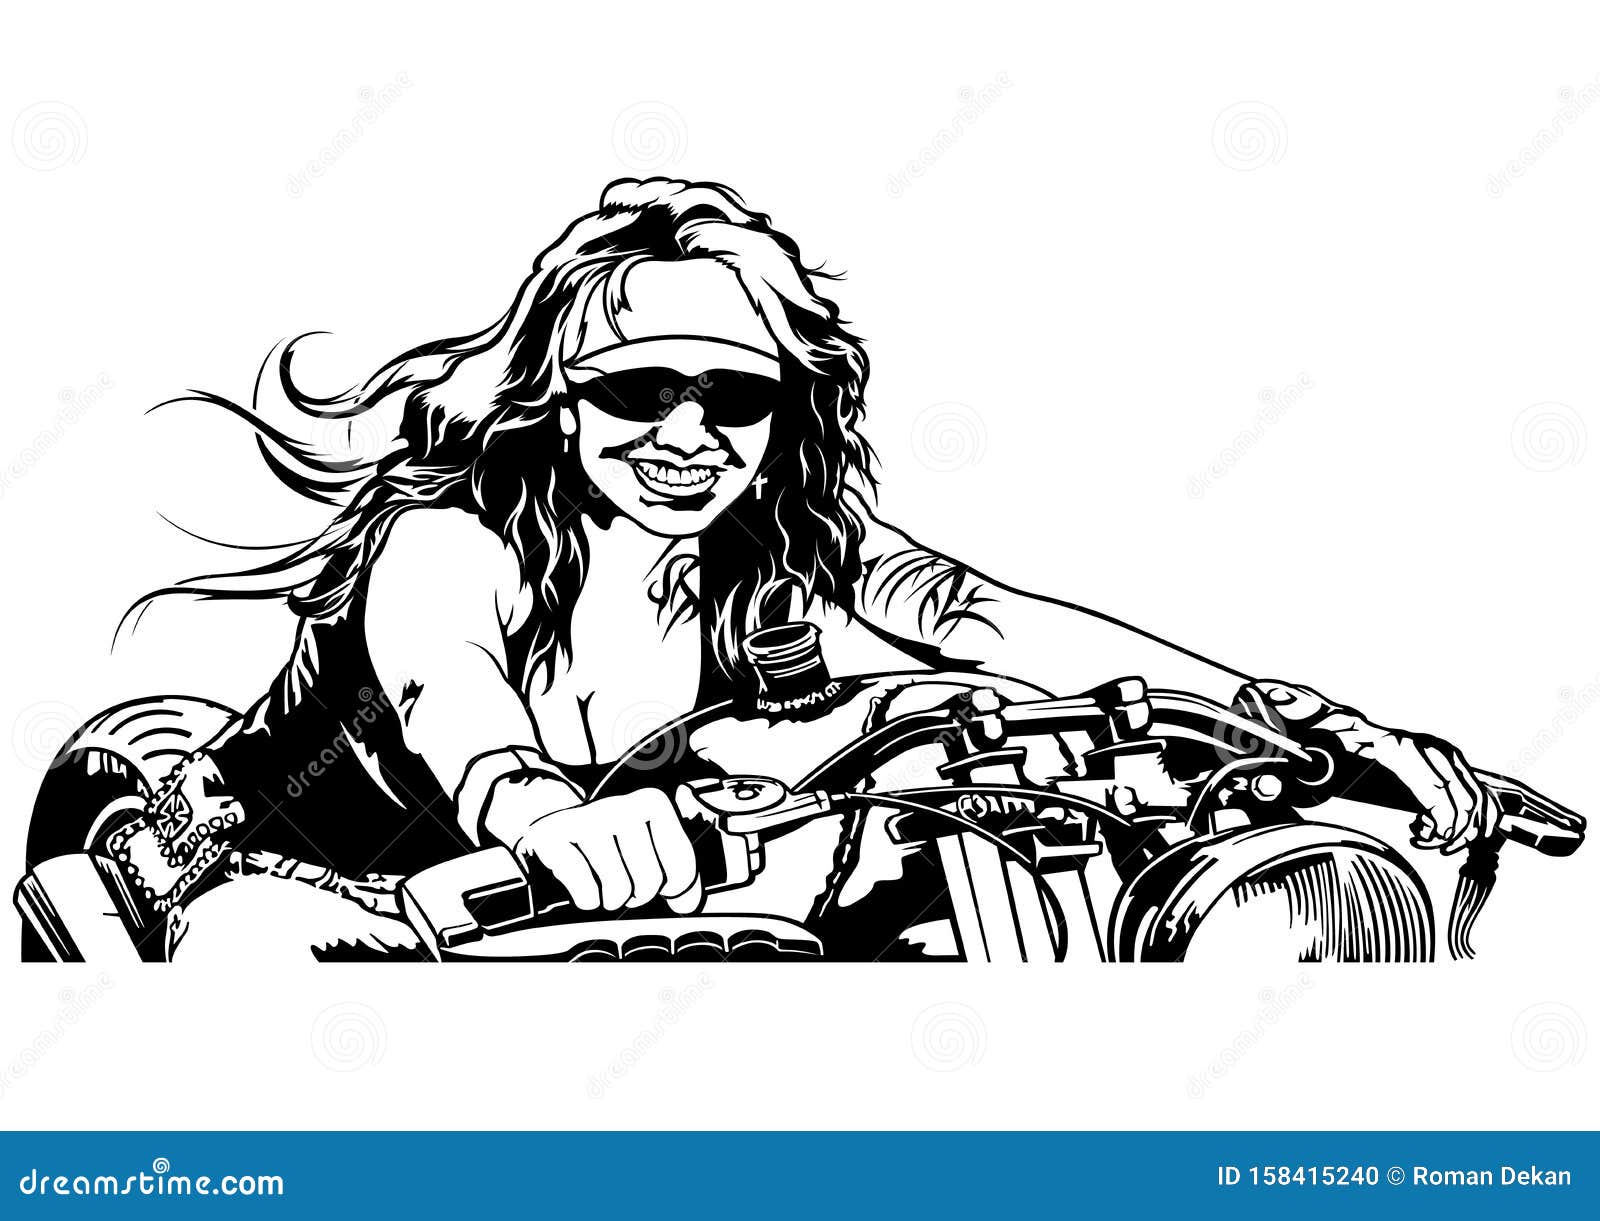 Download Black And White Woman Motorcyclist Stock Vector - Illustration of freedom, illustration: 158415240